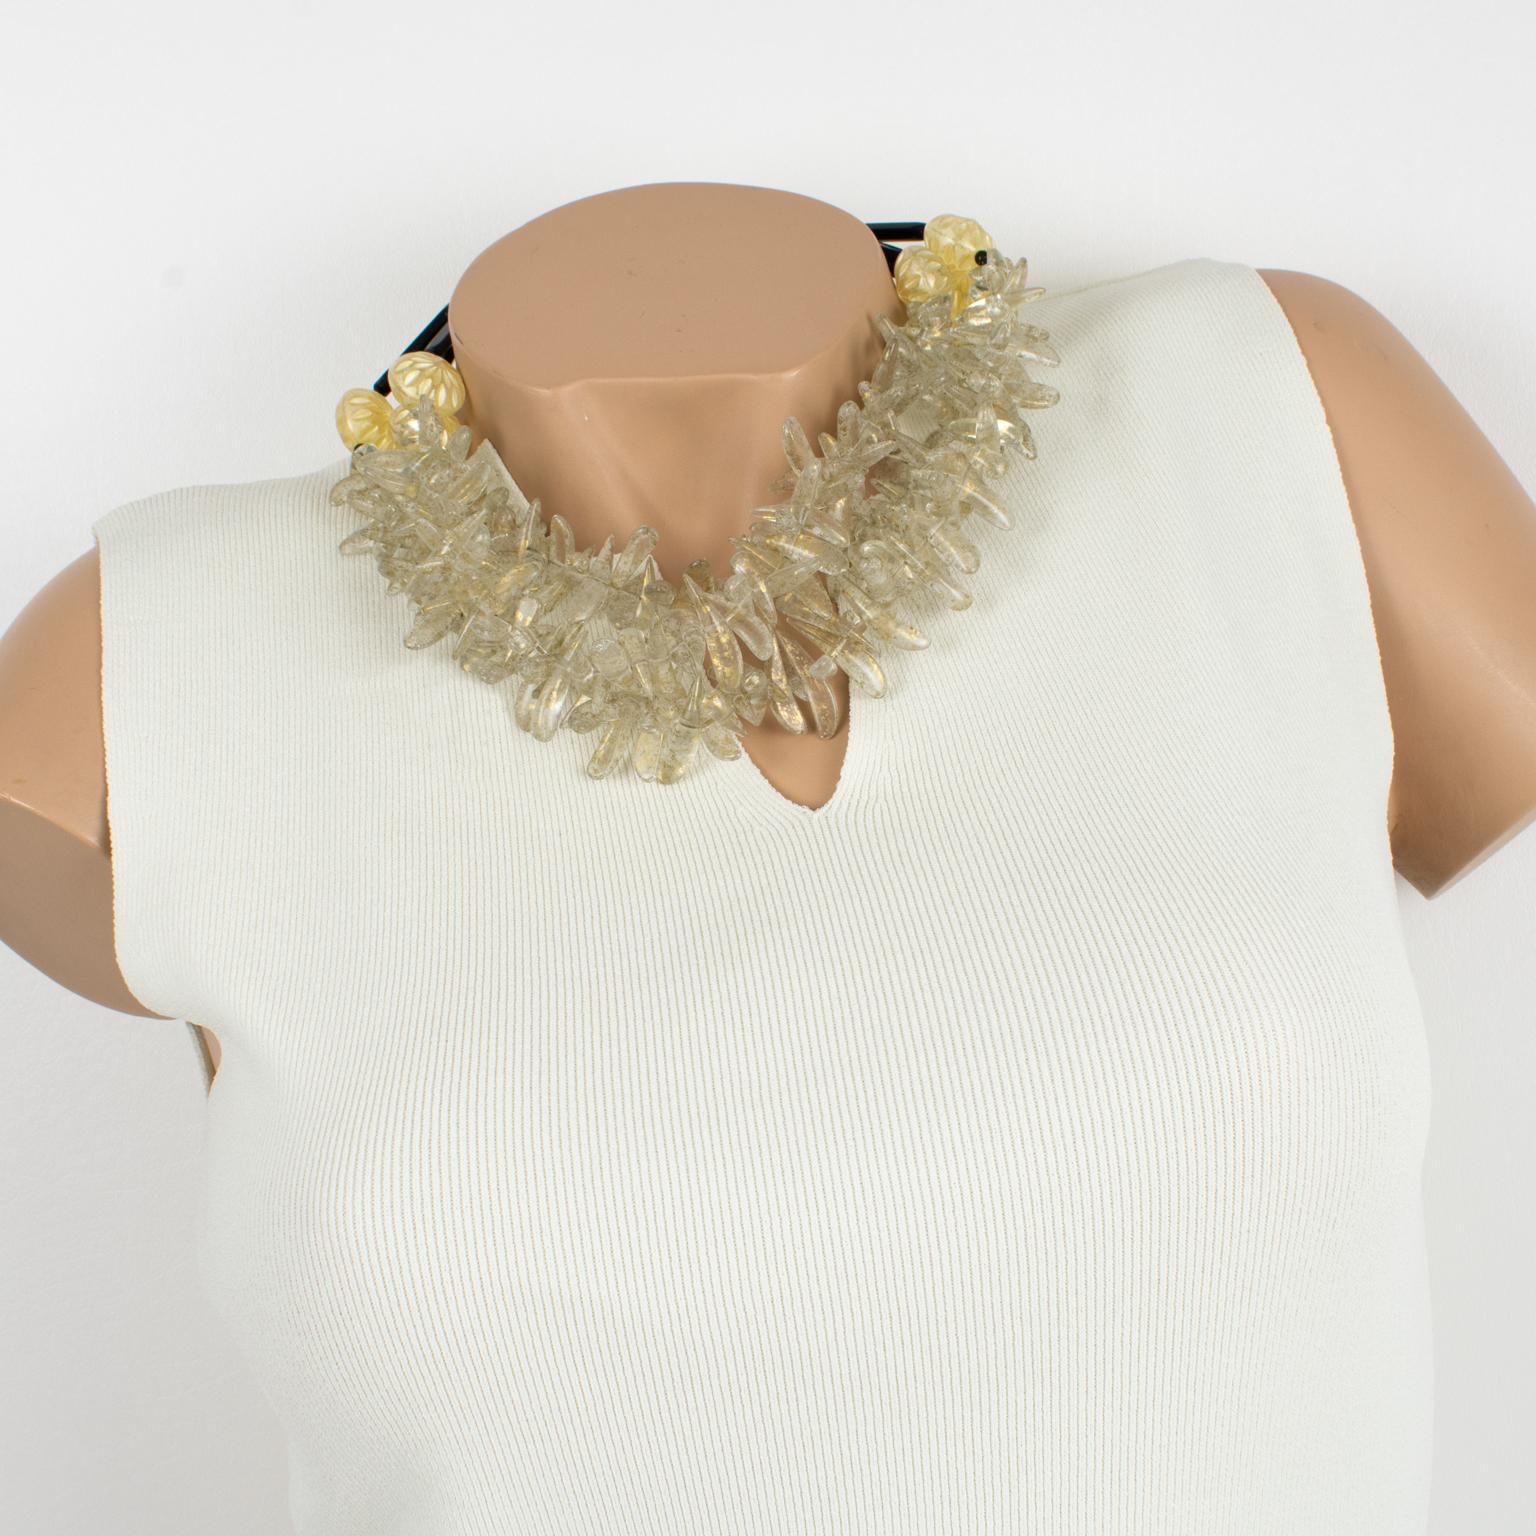 Elegant Angela Caputi, made in Italy resin choker necklace. This necklace features chunky spikes beads with gold flakes inclusions and works on transparent-gold color with black contrast. The multi-strand shape is contrasted with black stick beads